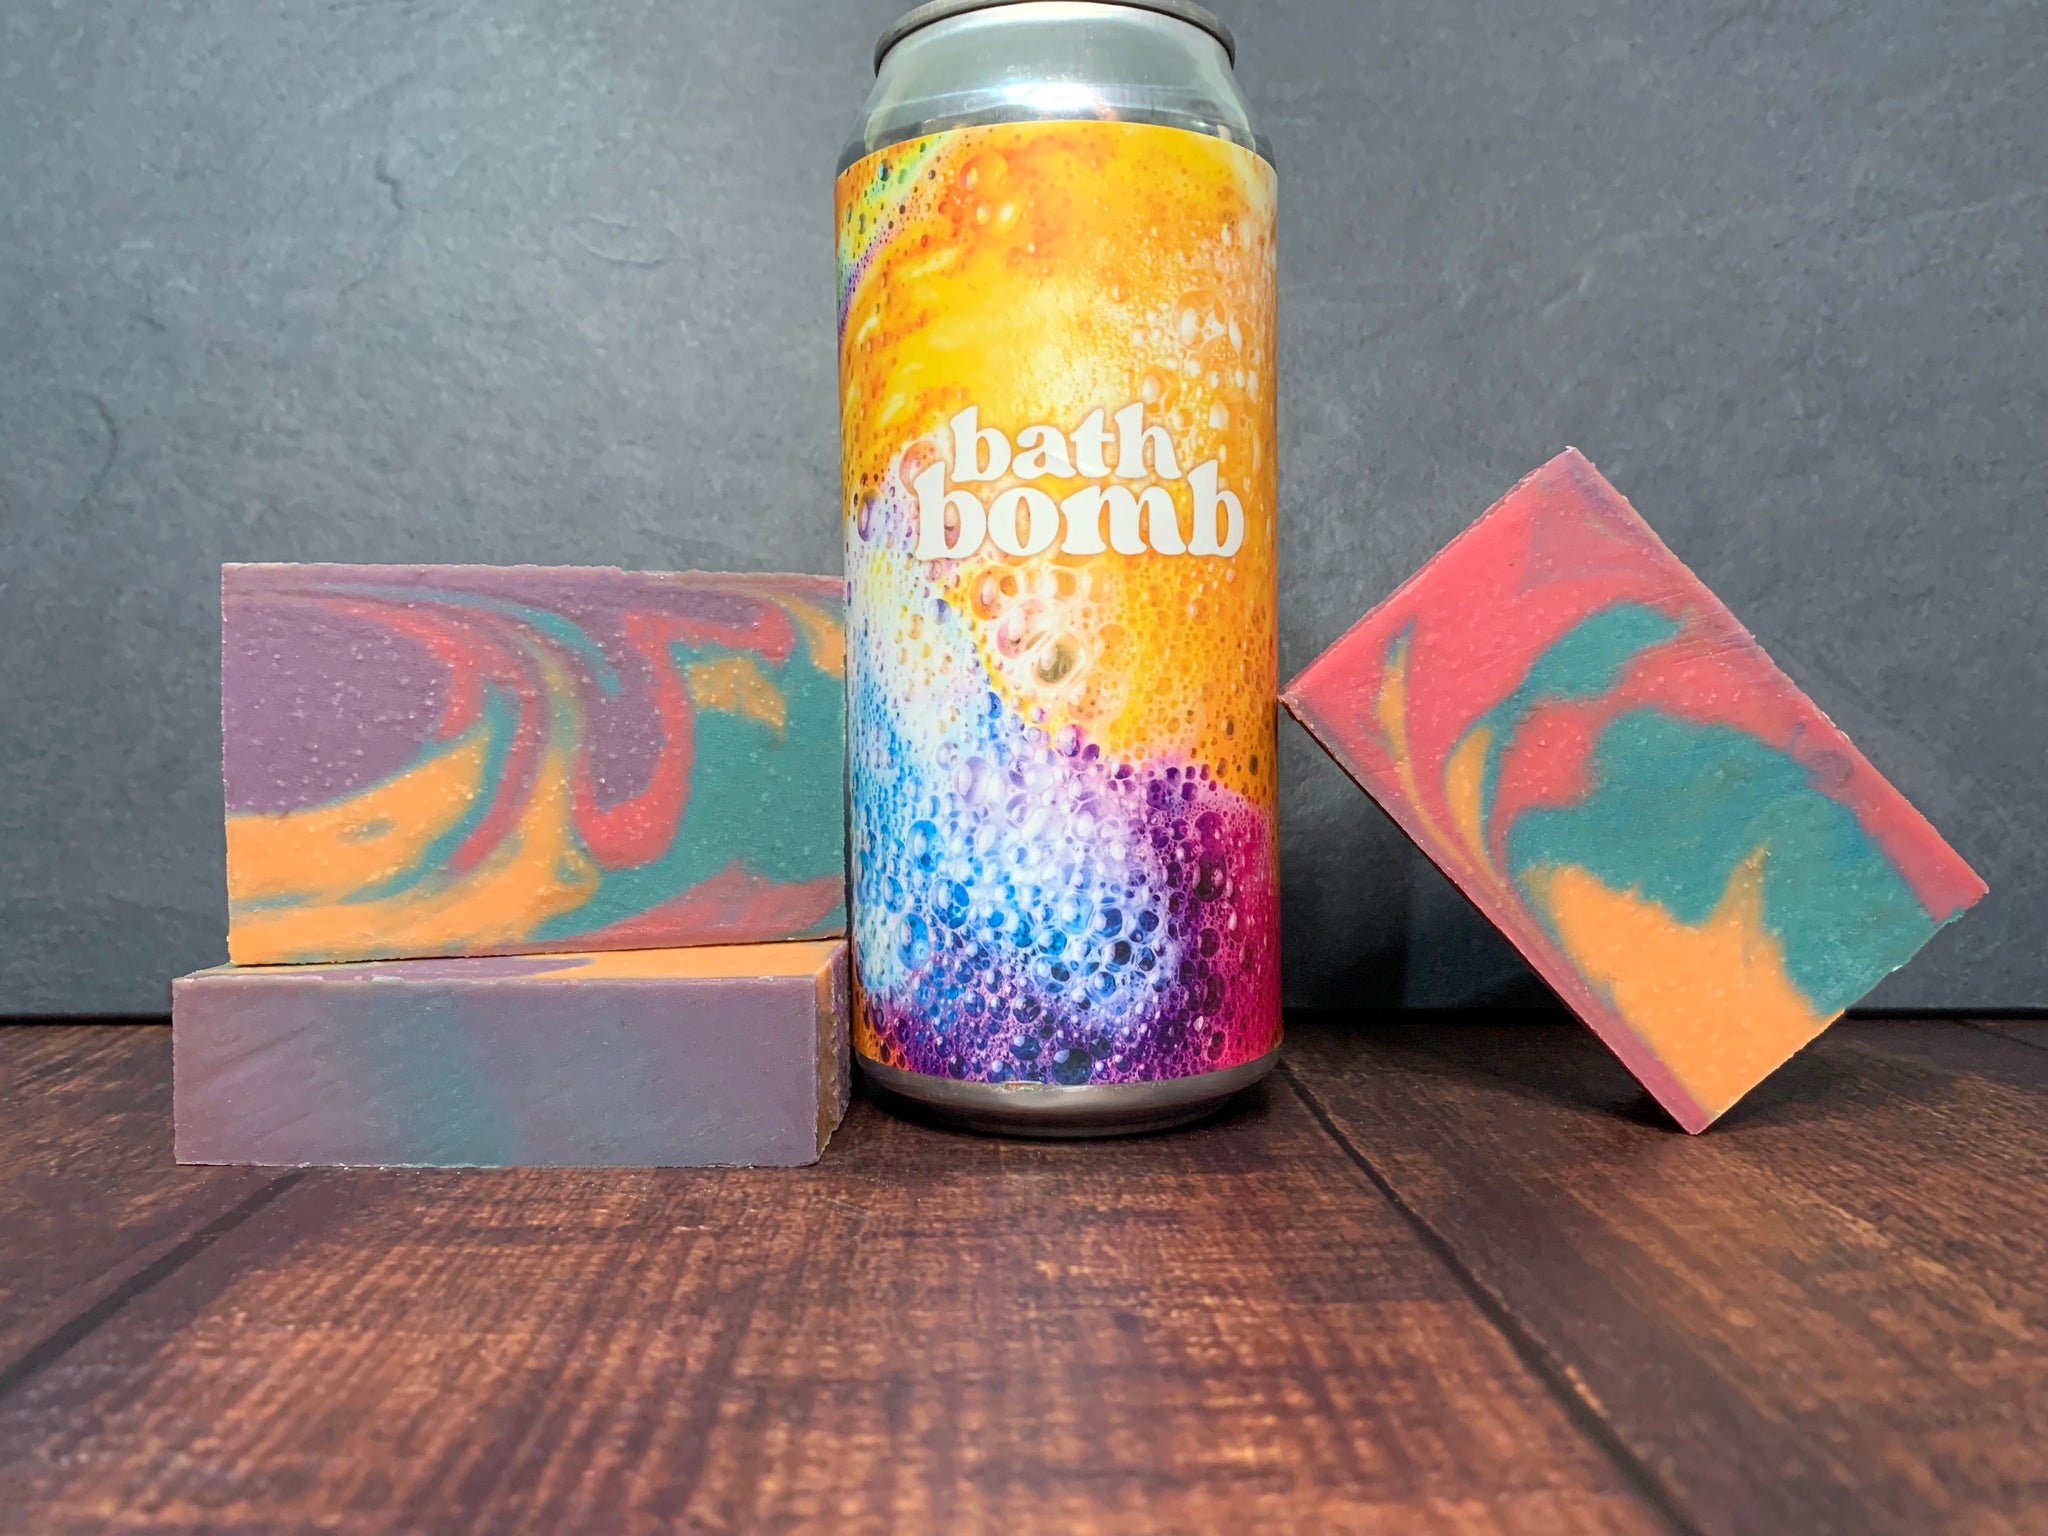 rainbow beer soap handcrafted by spunkndisorderly craft beer soaps with rainbow sherbet bath bomb fruited sour beer from fifth frame brewing co. New York craft brewery yellow pink blue purple beer soap for her by spunkndisorderly craft beer soaps